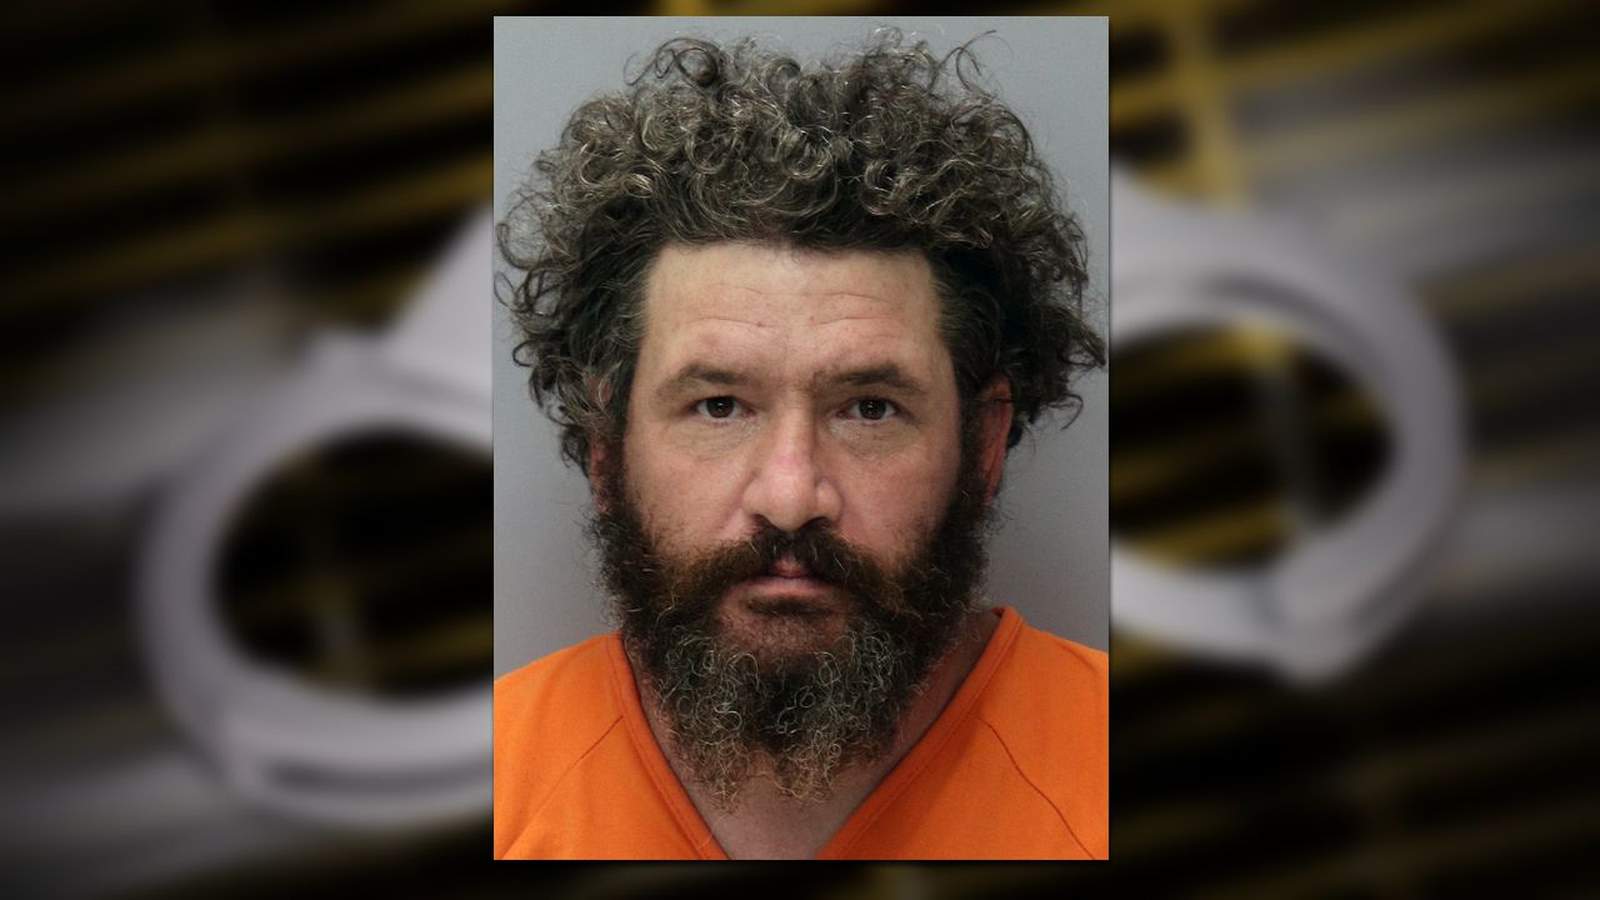 Man accused of fatally stabbing wife in St. Johns County charged with first-degree murder